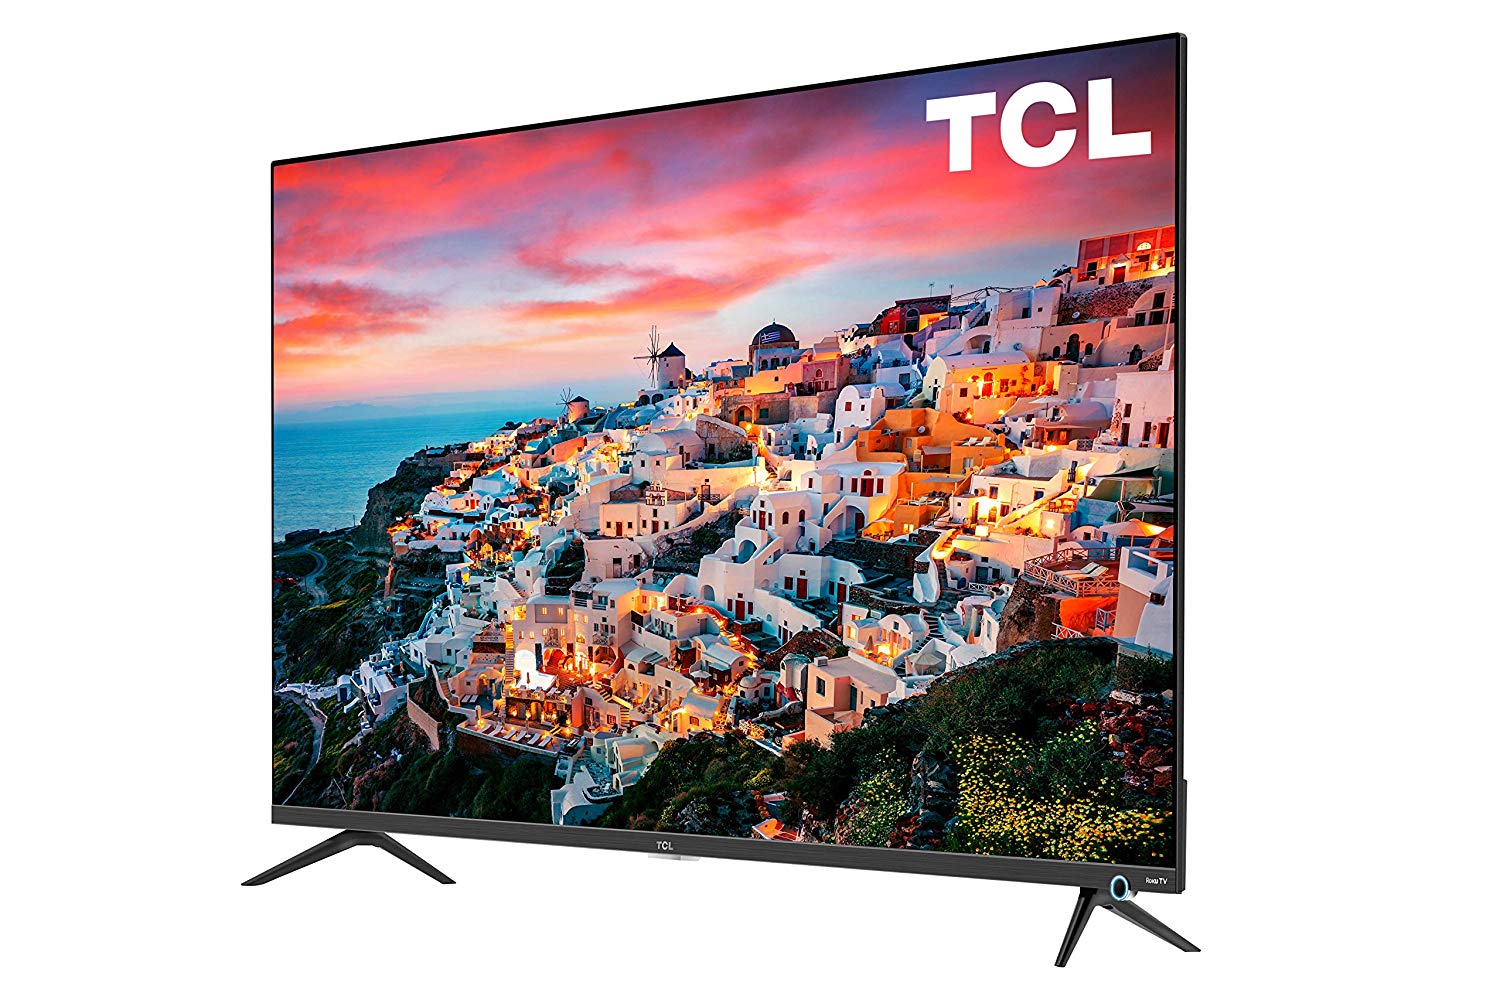 TCL TV troubleshooting